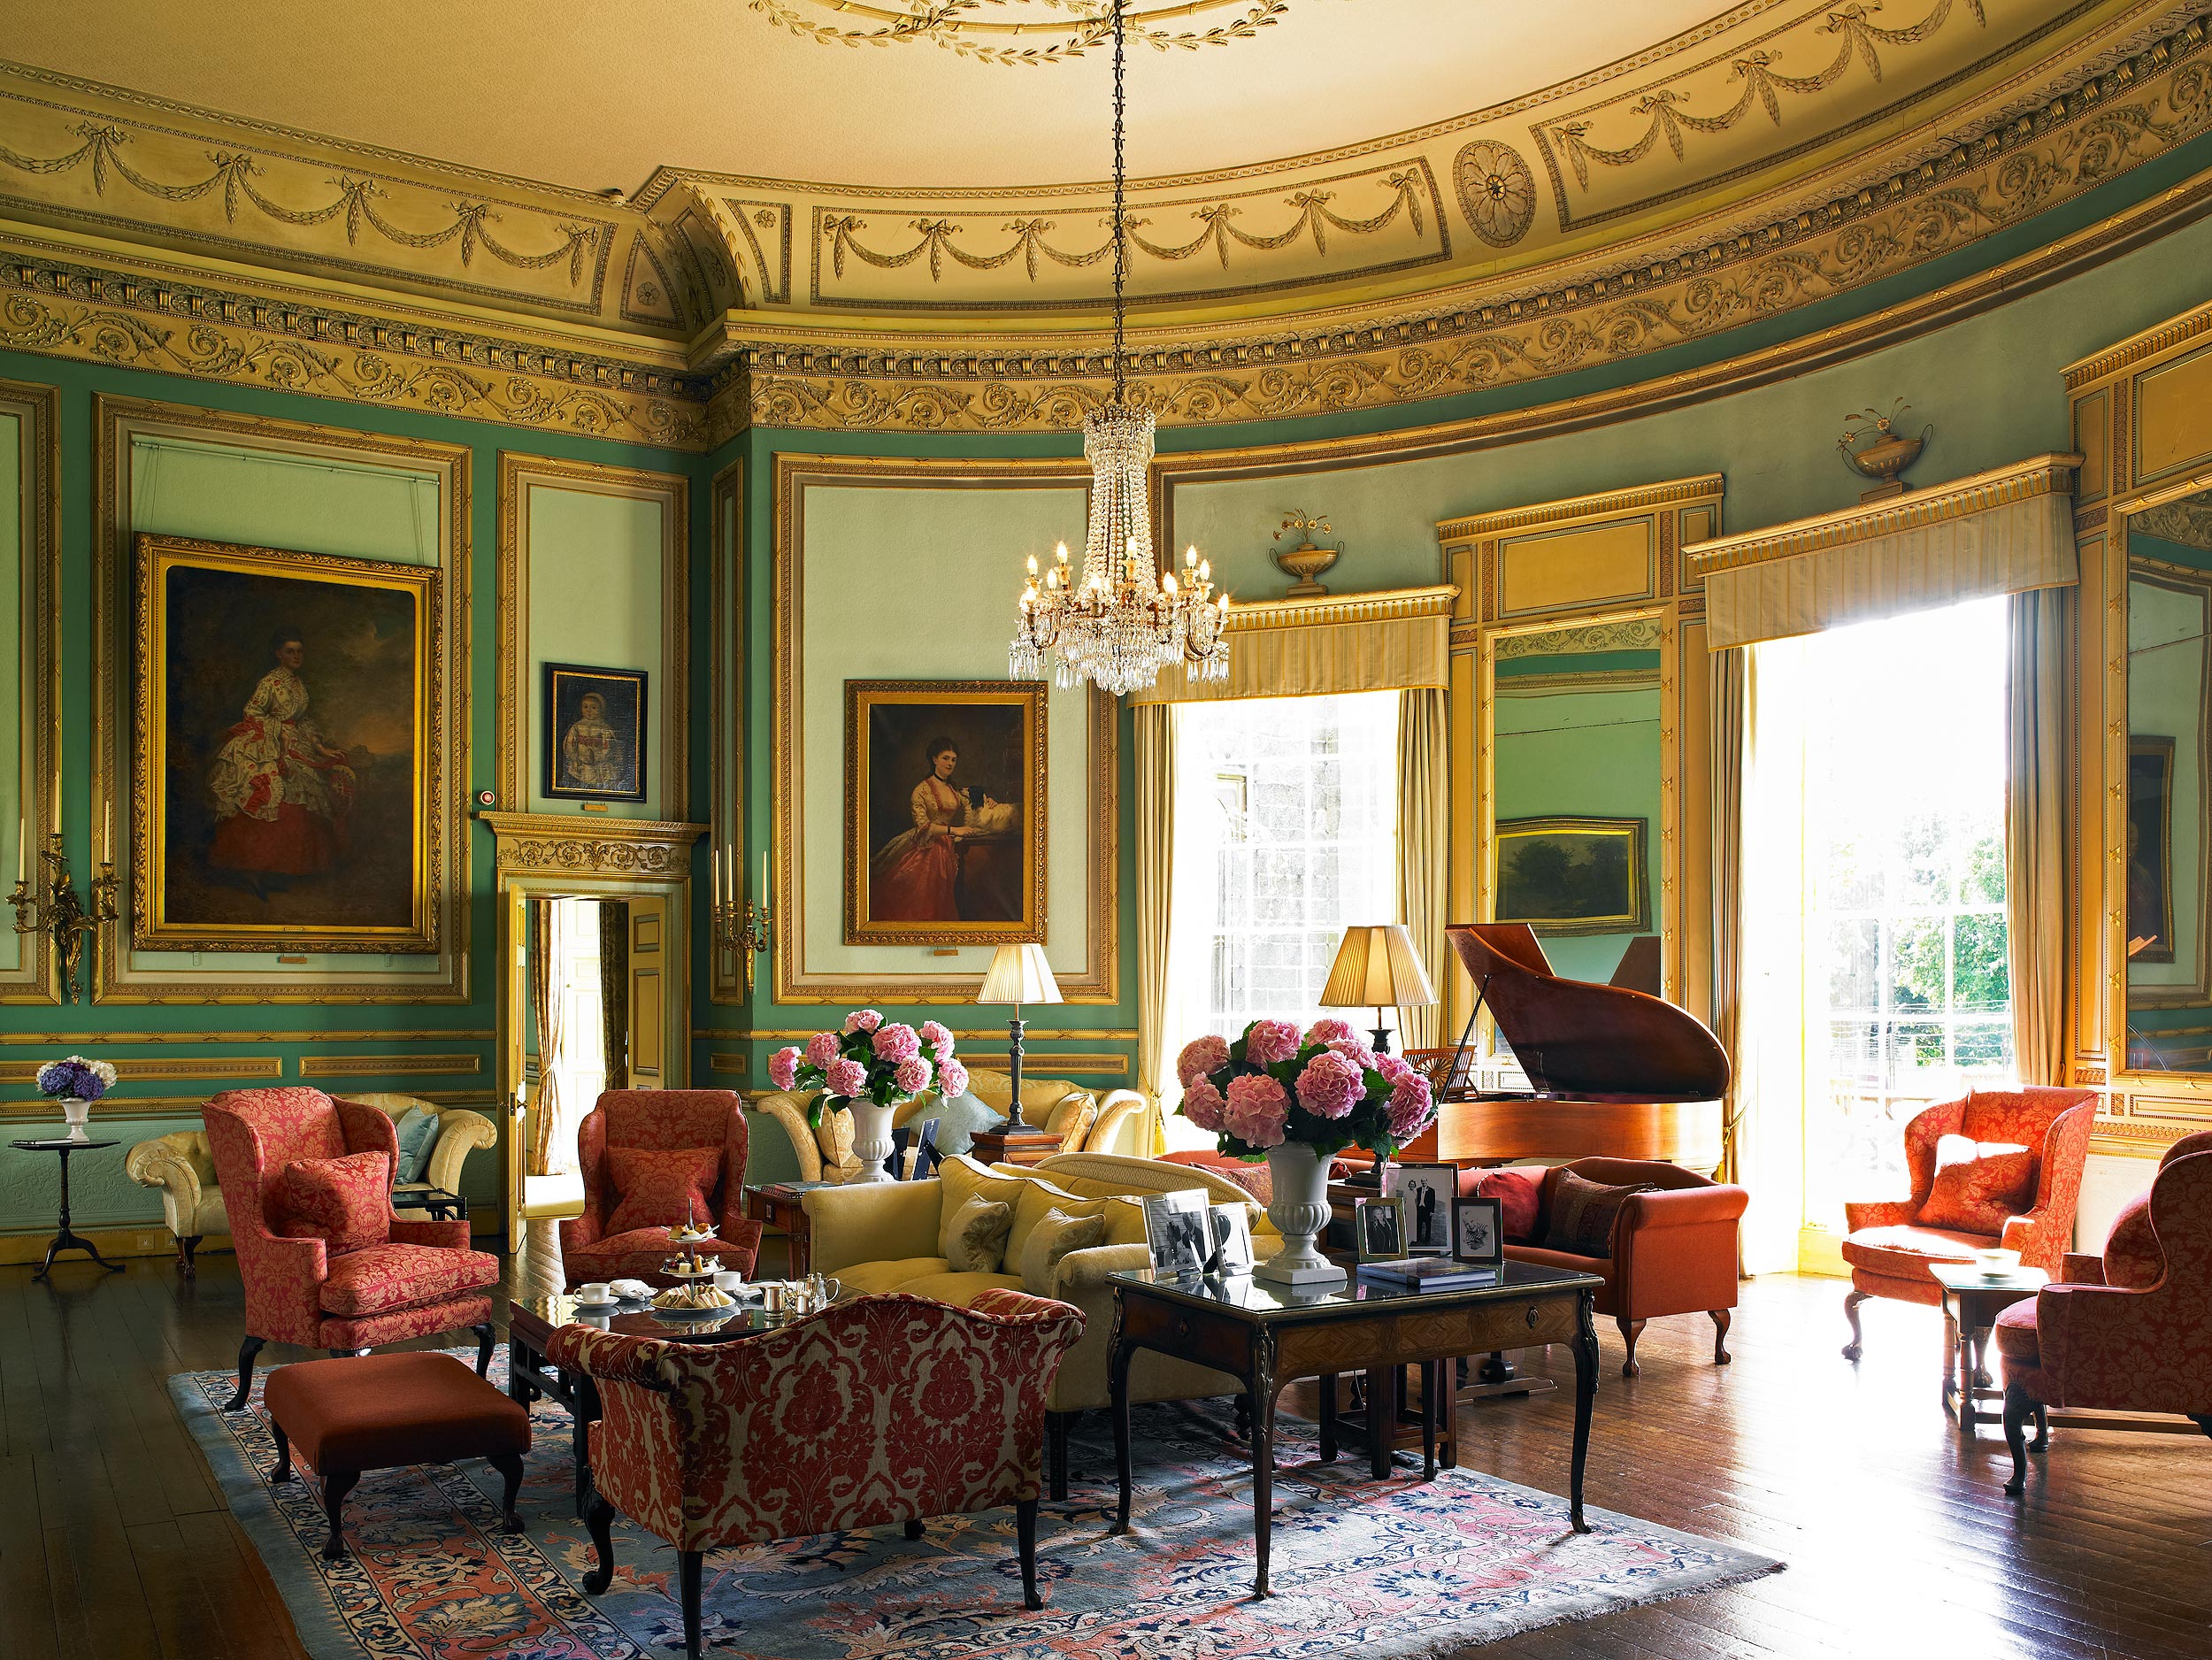 The drawing room at Swinton Park hotel, Yorkshire, UK.  Resort photography by Mike Caldwell